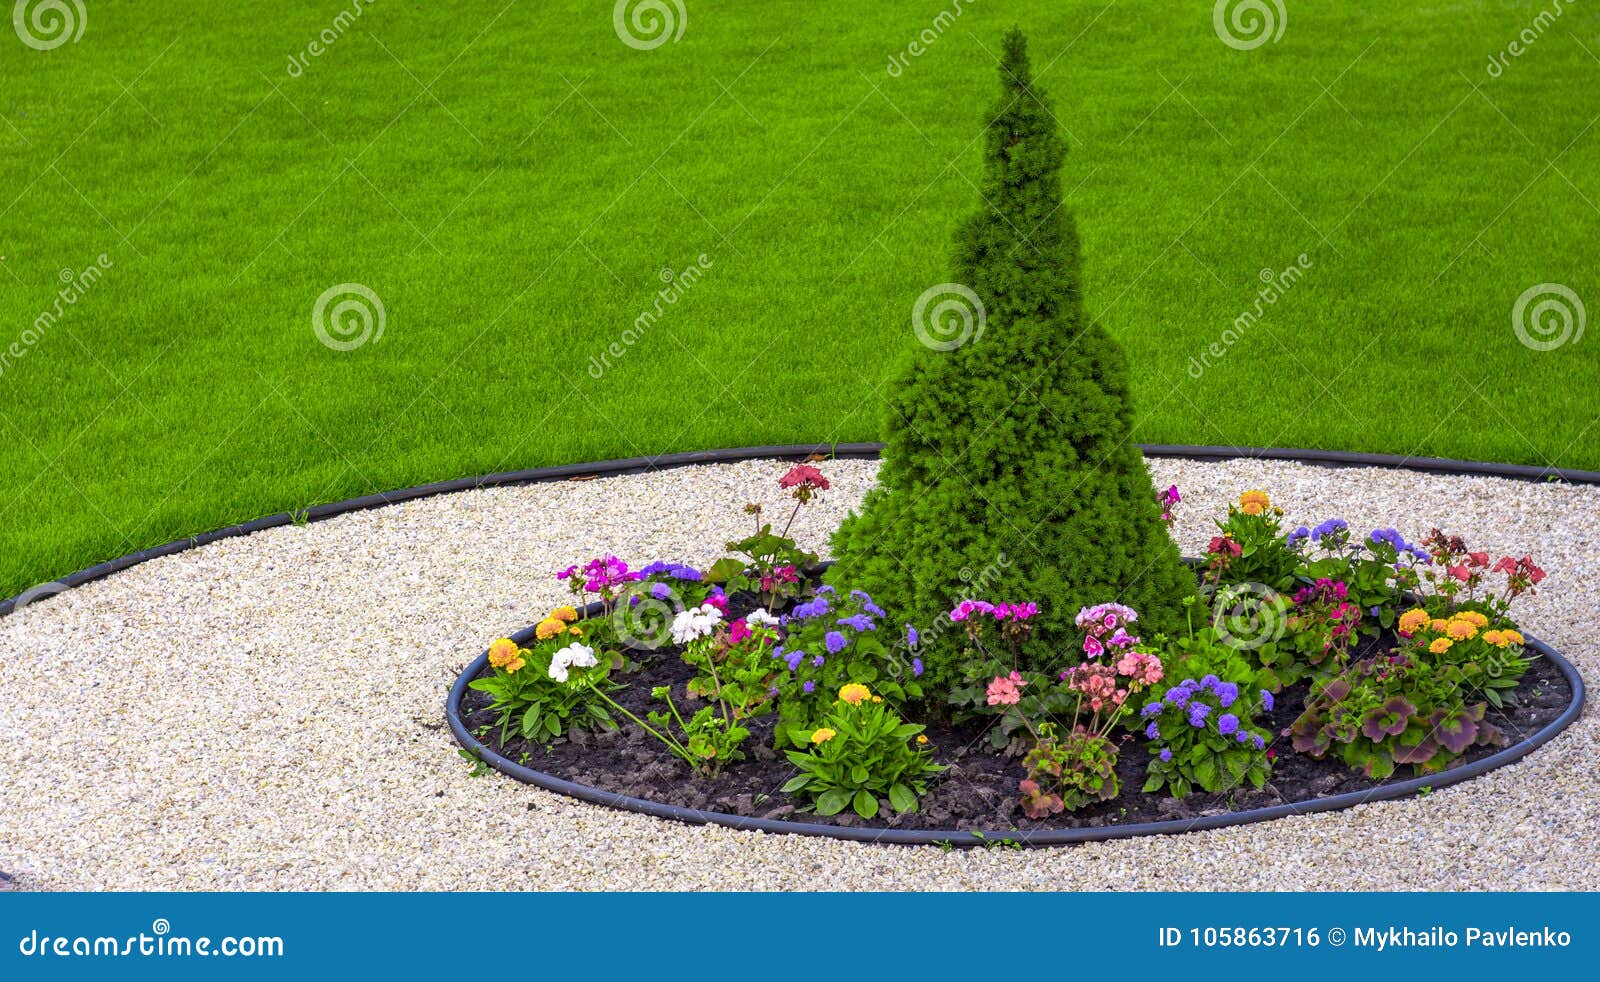 Large Green Healthy Canadian Christmas Tree Close-up Stock Photo ...